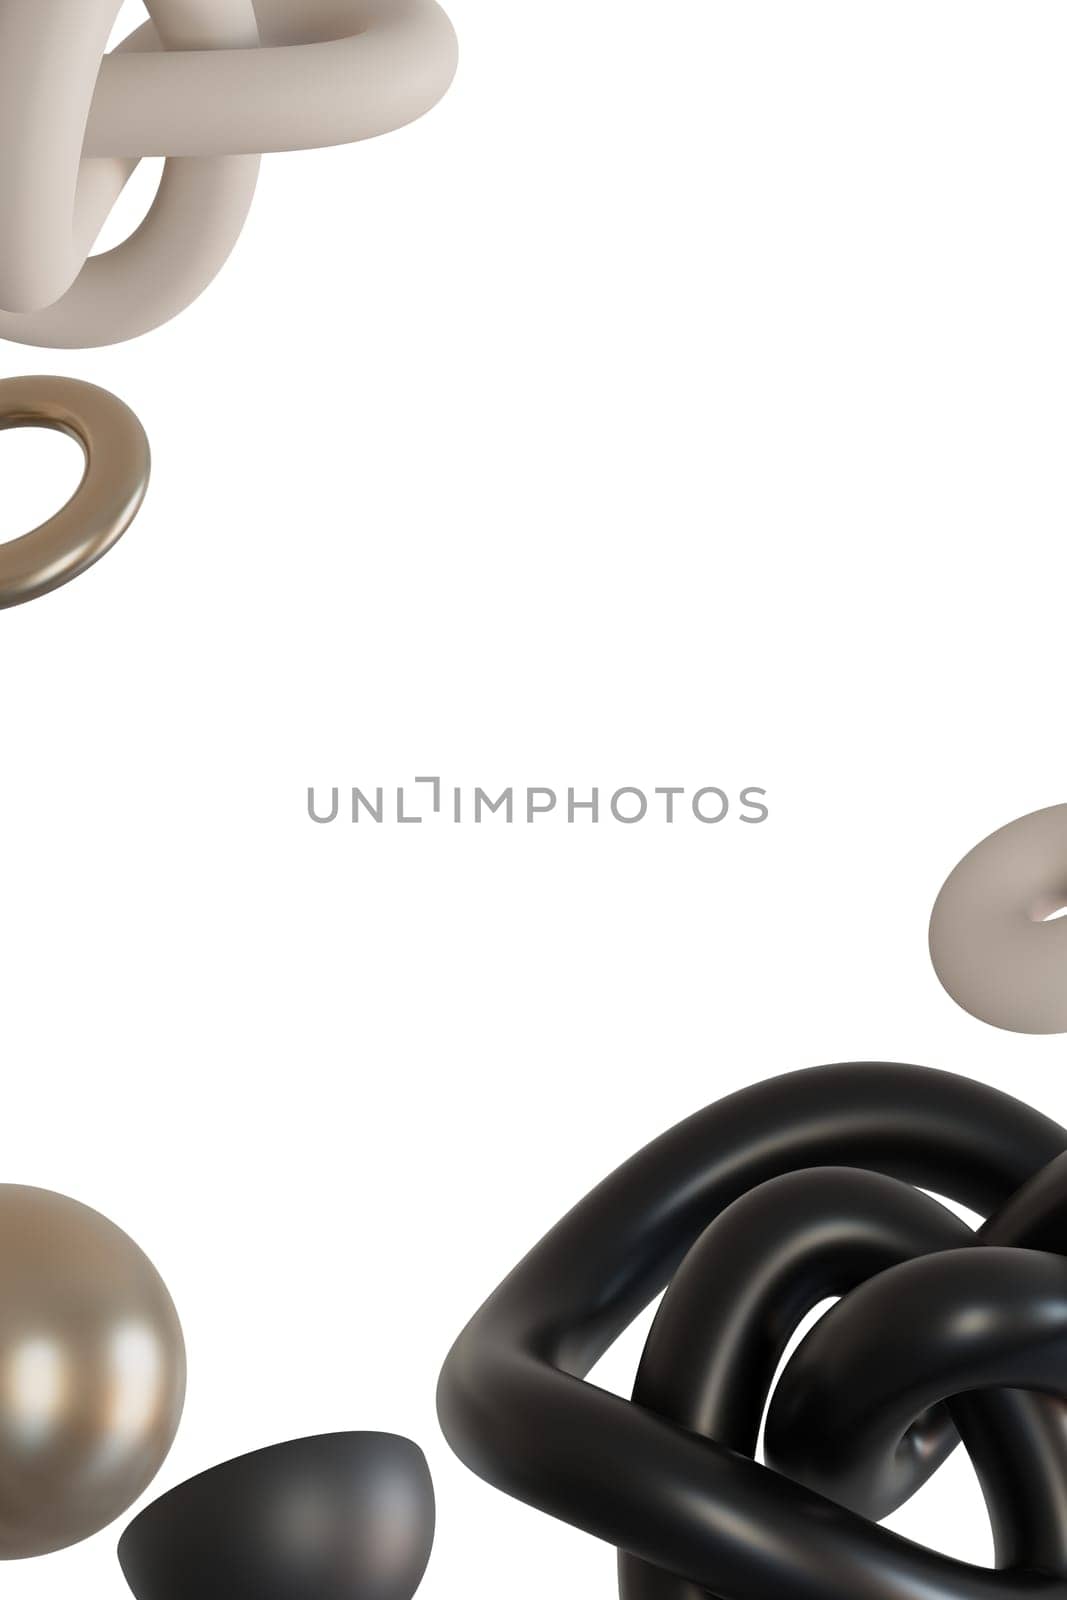 Elegant, minimalistic frame with abstract, floating black, beige and metallic 3D shapes, isolated on white background. Modern border. Copy space in the middle. Neutral tones. 3D render